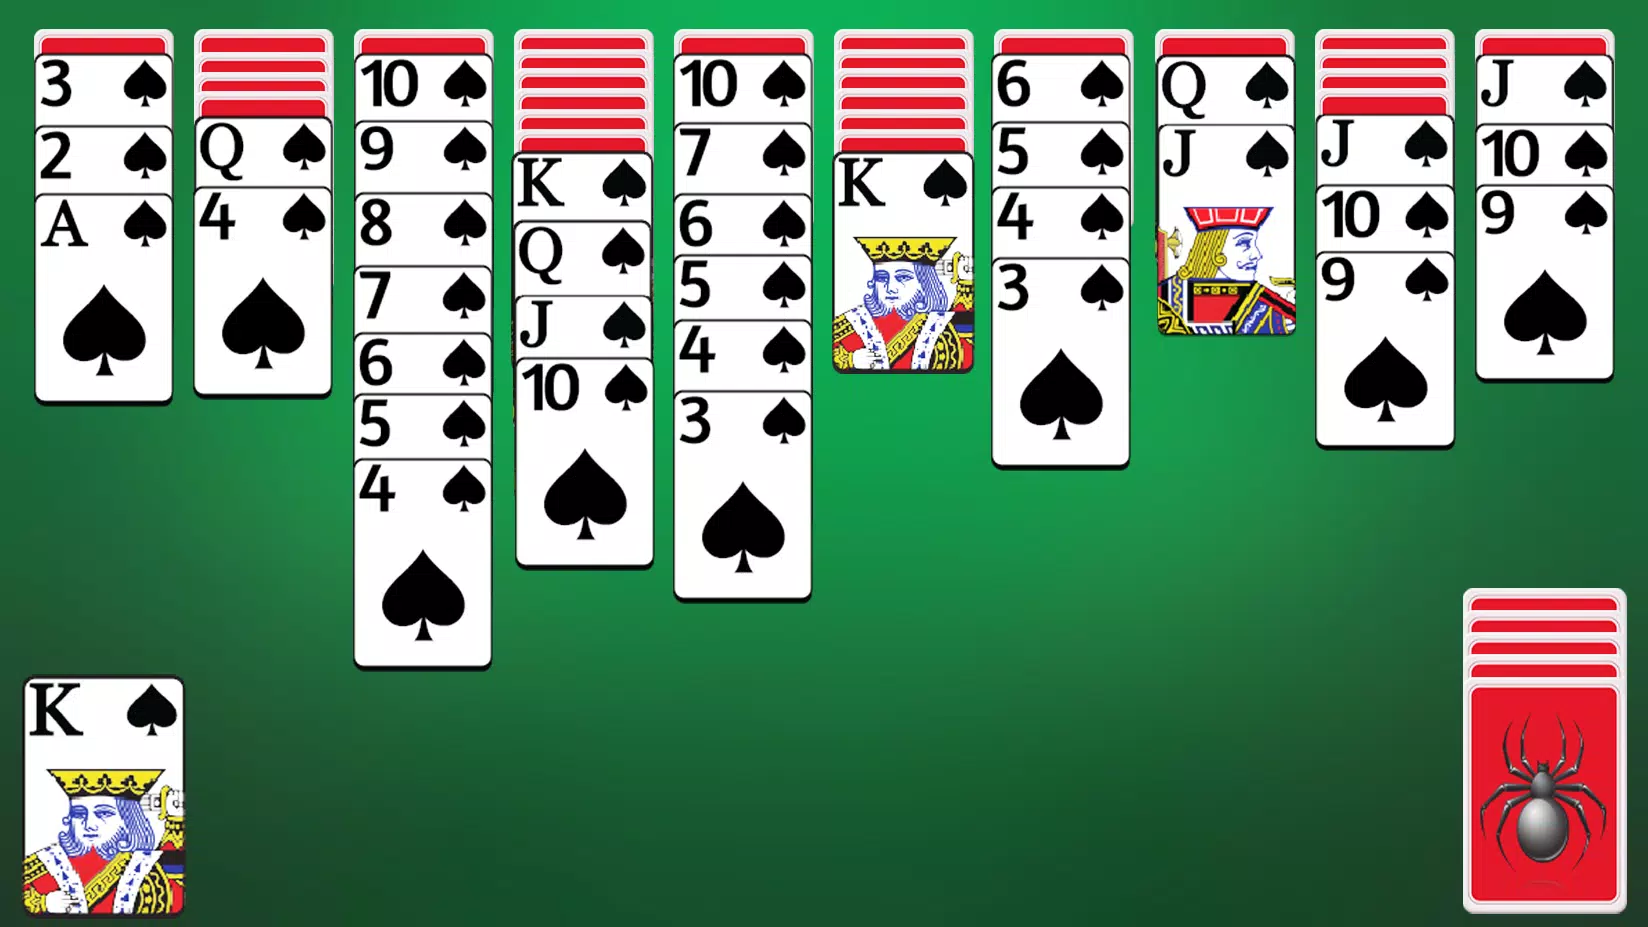 Spider Solitaire 3.9.8.3 Free Download